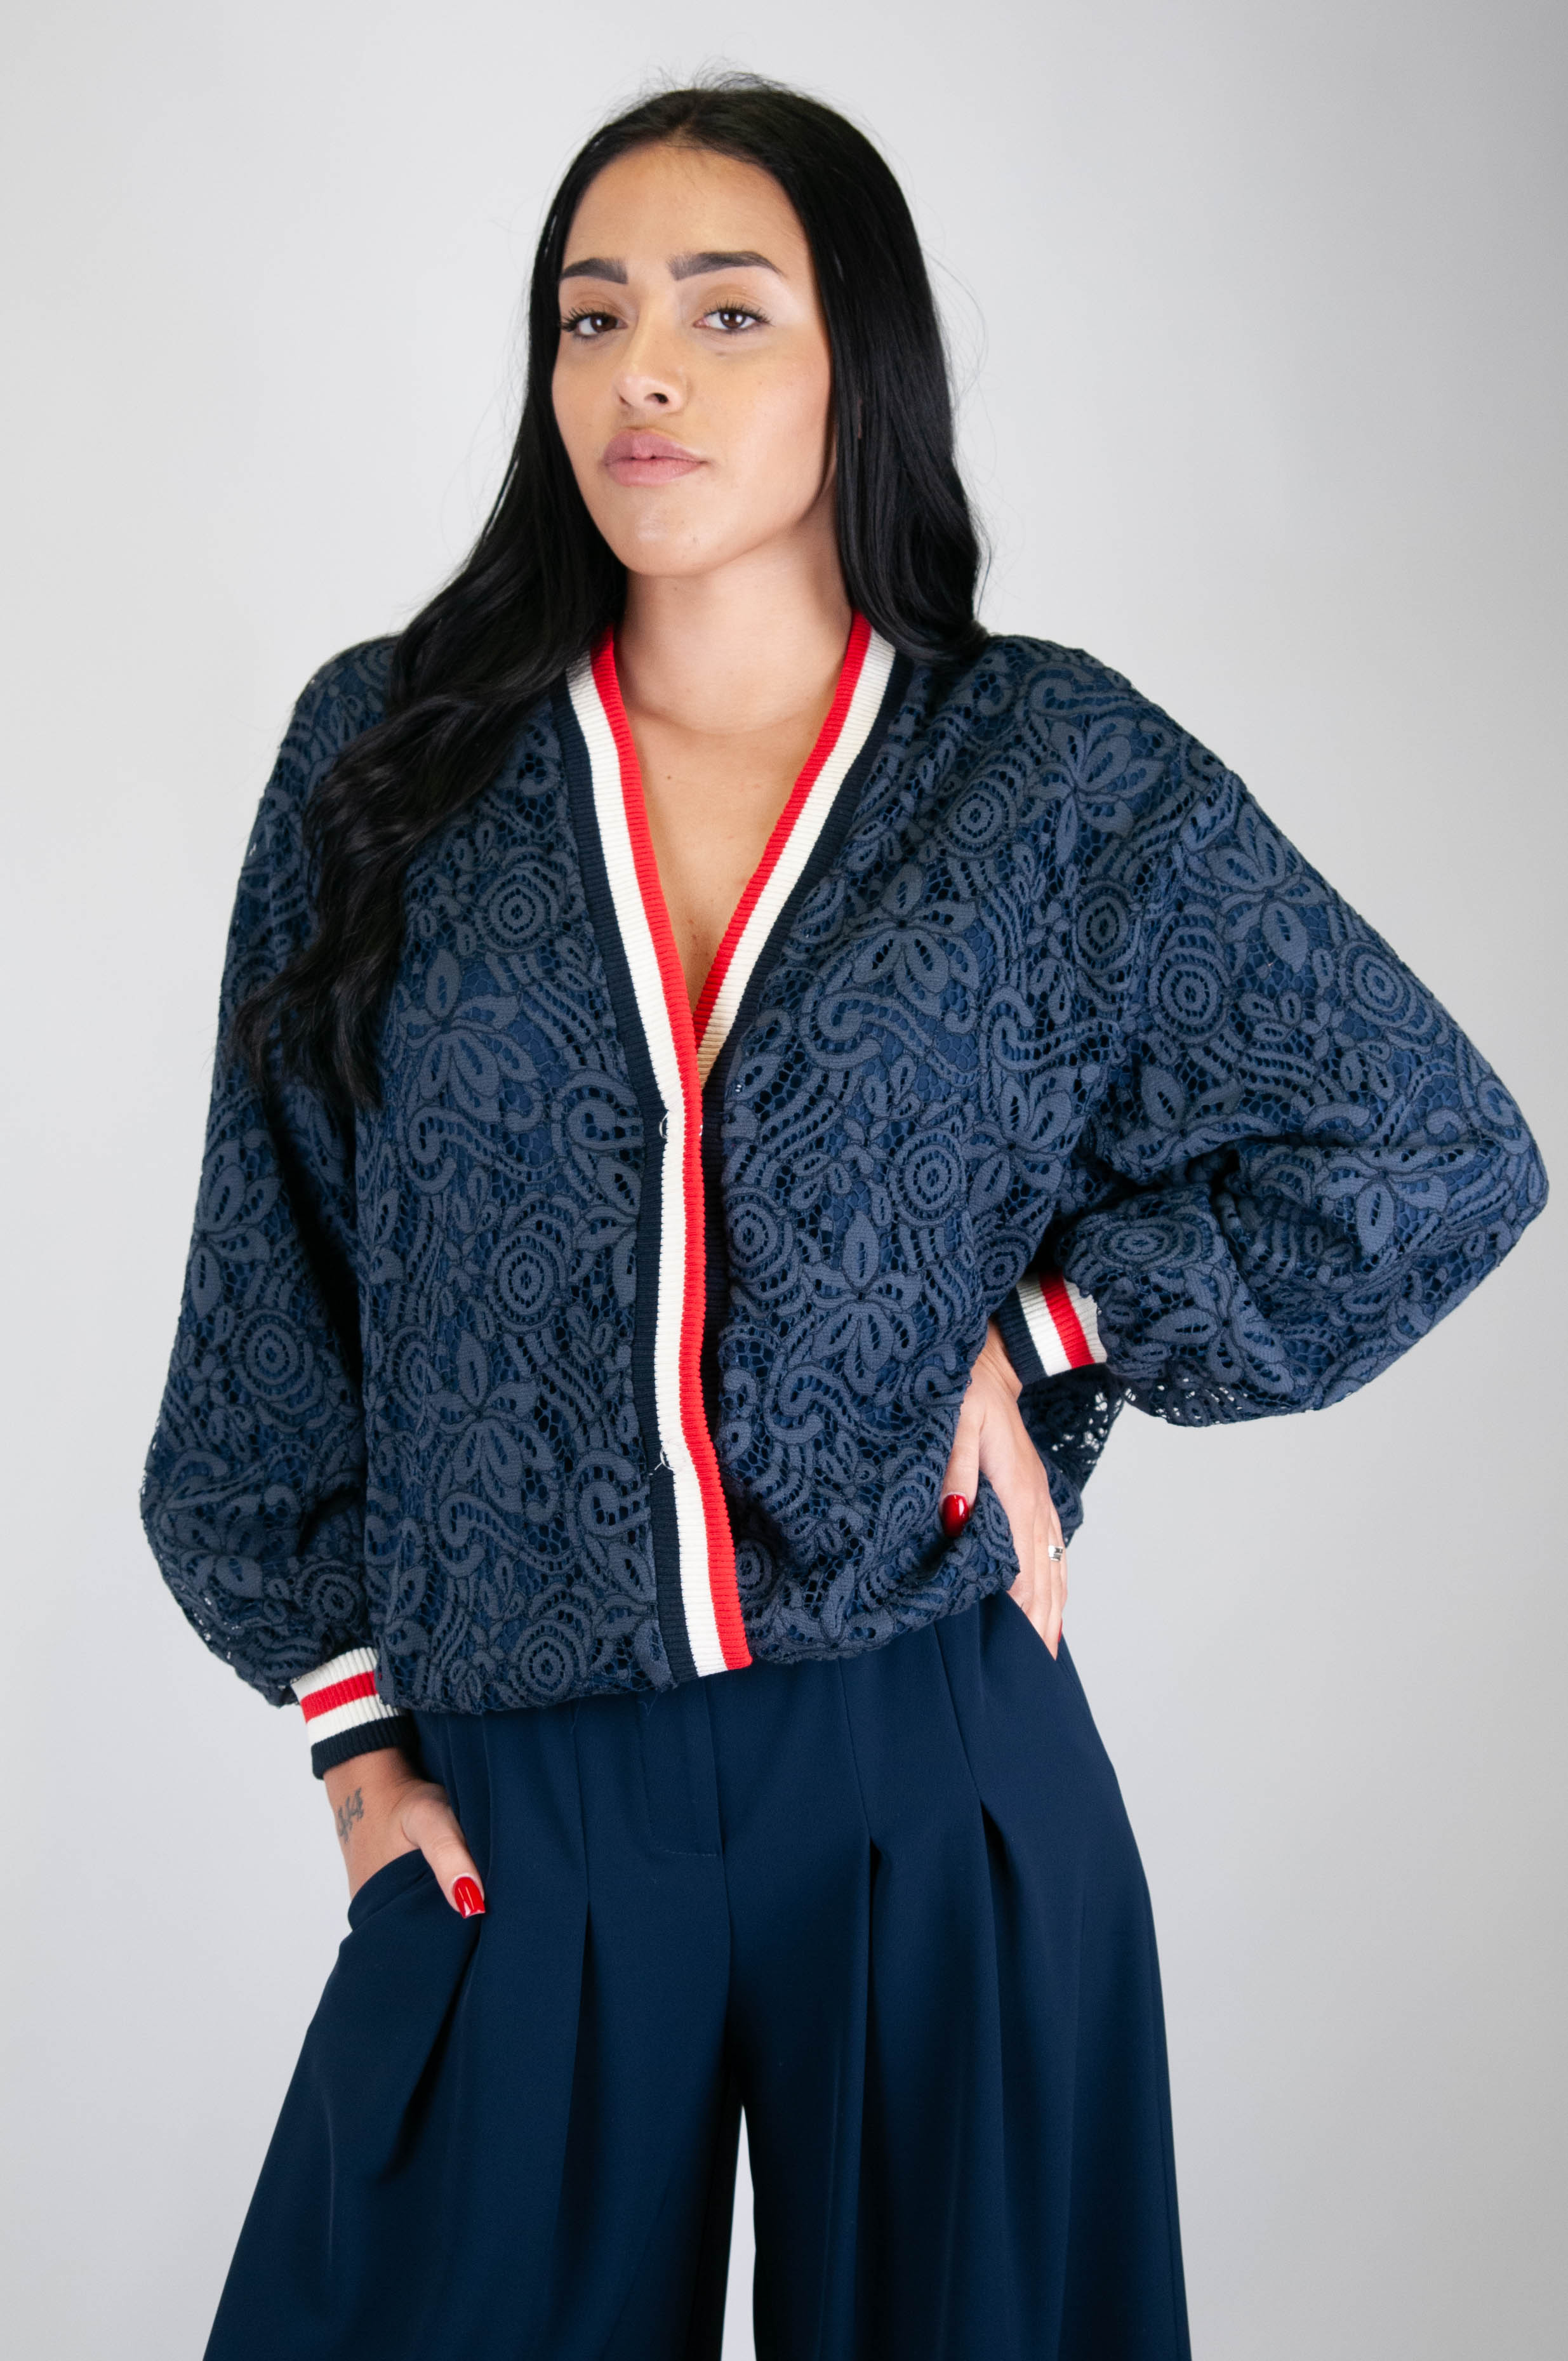 Tension in - Lace bomber jacket with contrasting profiles